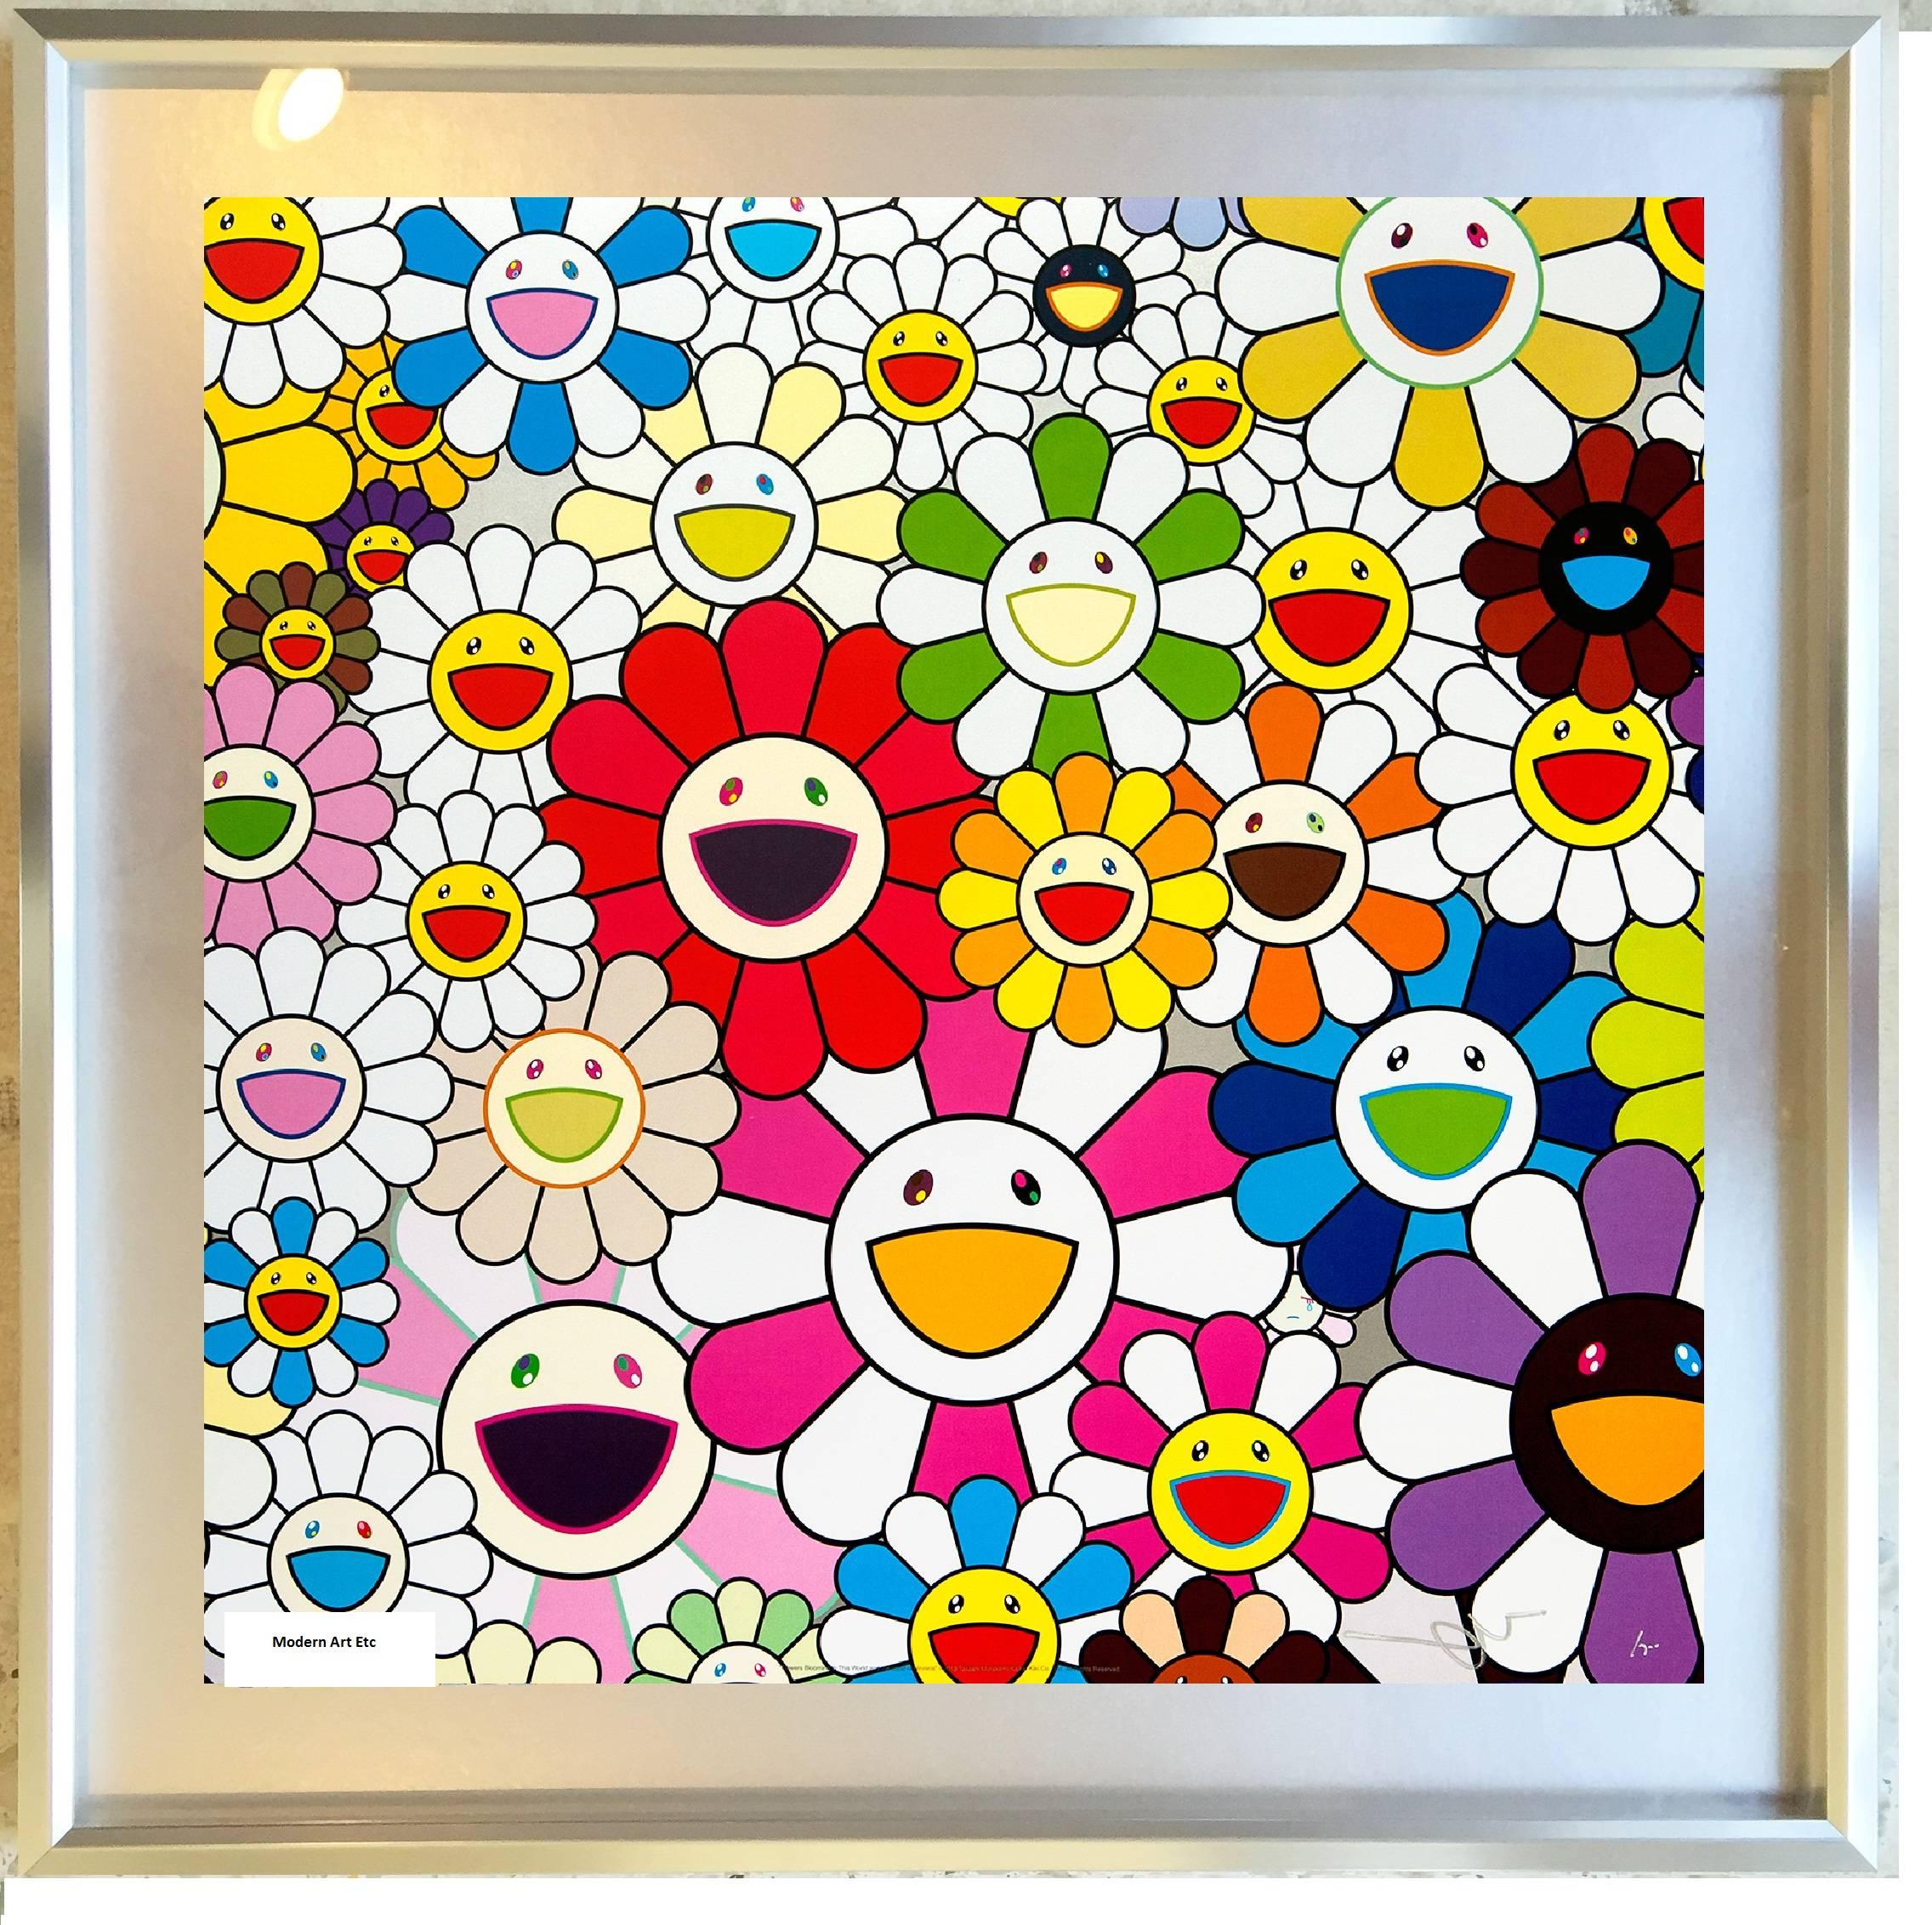 Flowers Blooming in this World and the Land of Nirvana 5&1 - Pair, Framing inc. - Print by Takashi Murakami